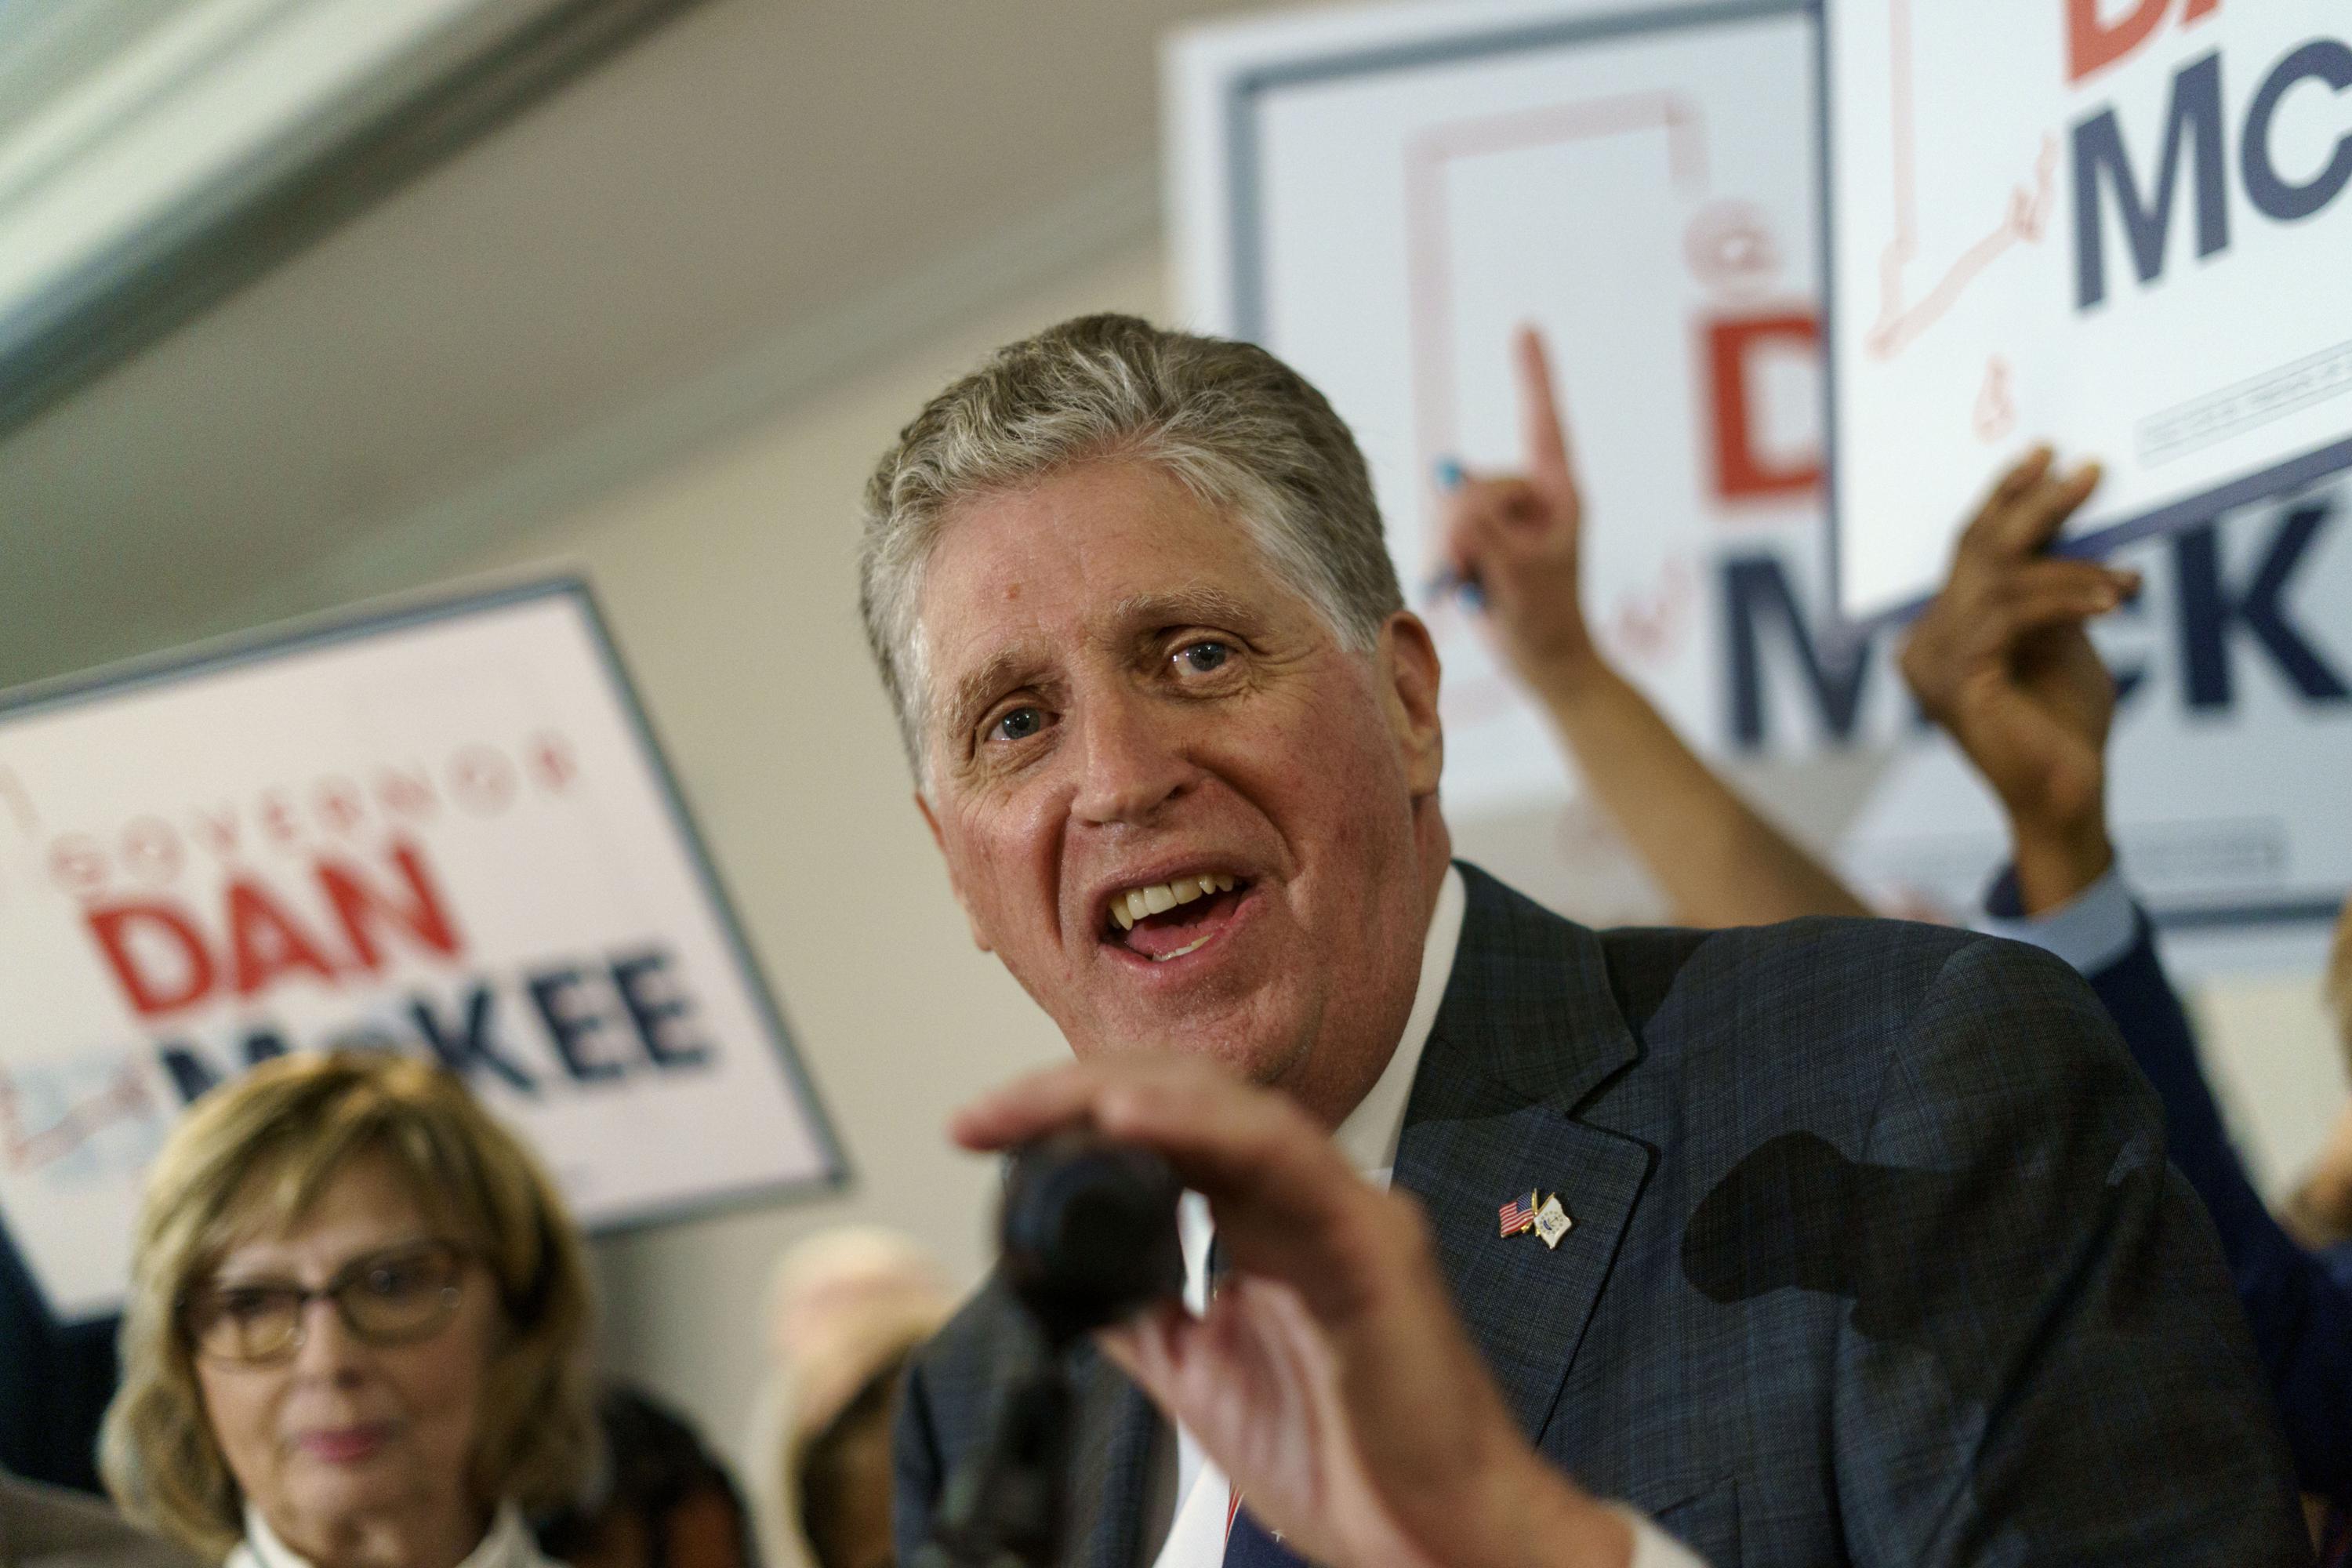 FILE — Rhode Island Gov. Dan McKee gives an acceptance speech Tuesday, Sept. 13, 2022, in front of supporters at a primary election night watch party, in Providence, R.I. McKee is to take oath of office in a ceremony Tuesday, Jan. 3, 2023. (AP Photo/David Goldman, File)